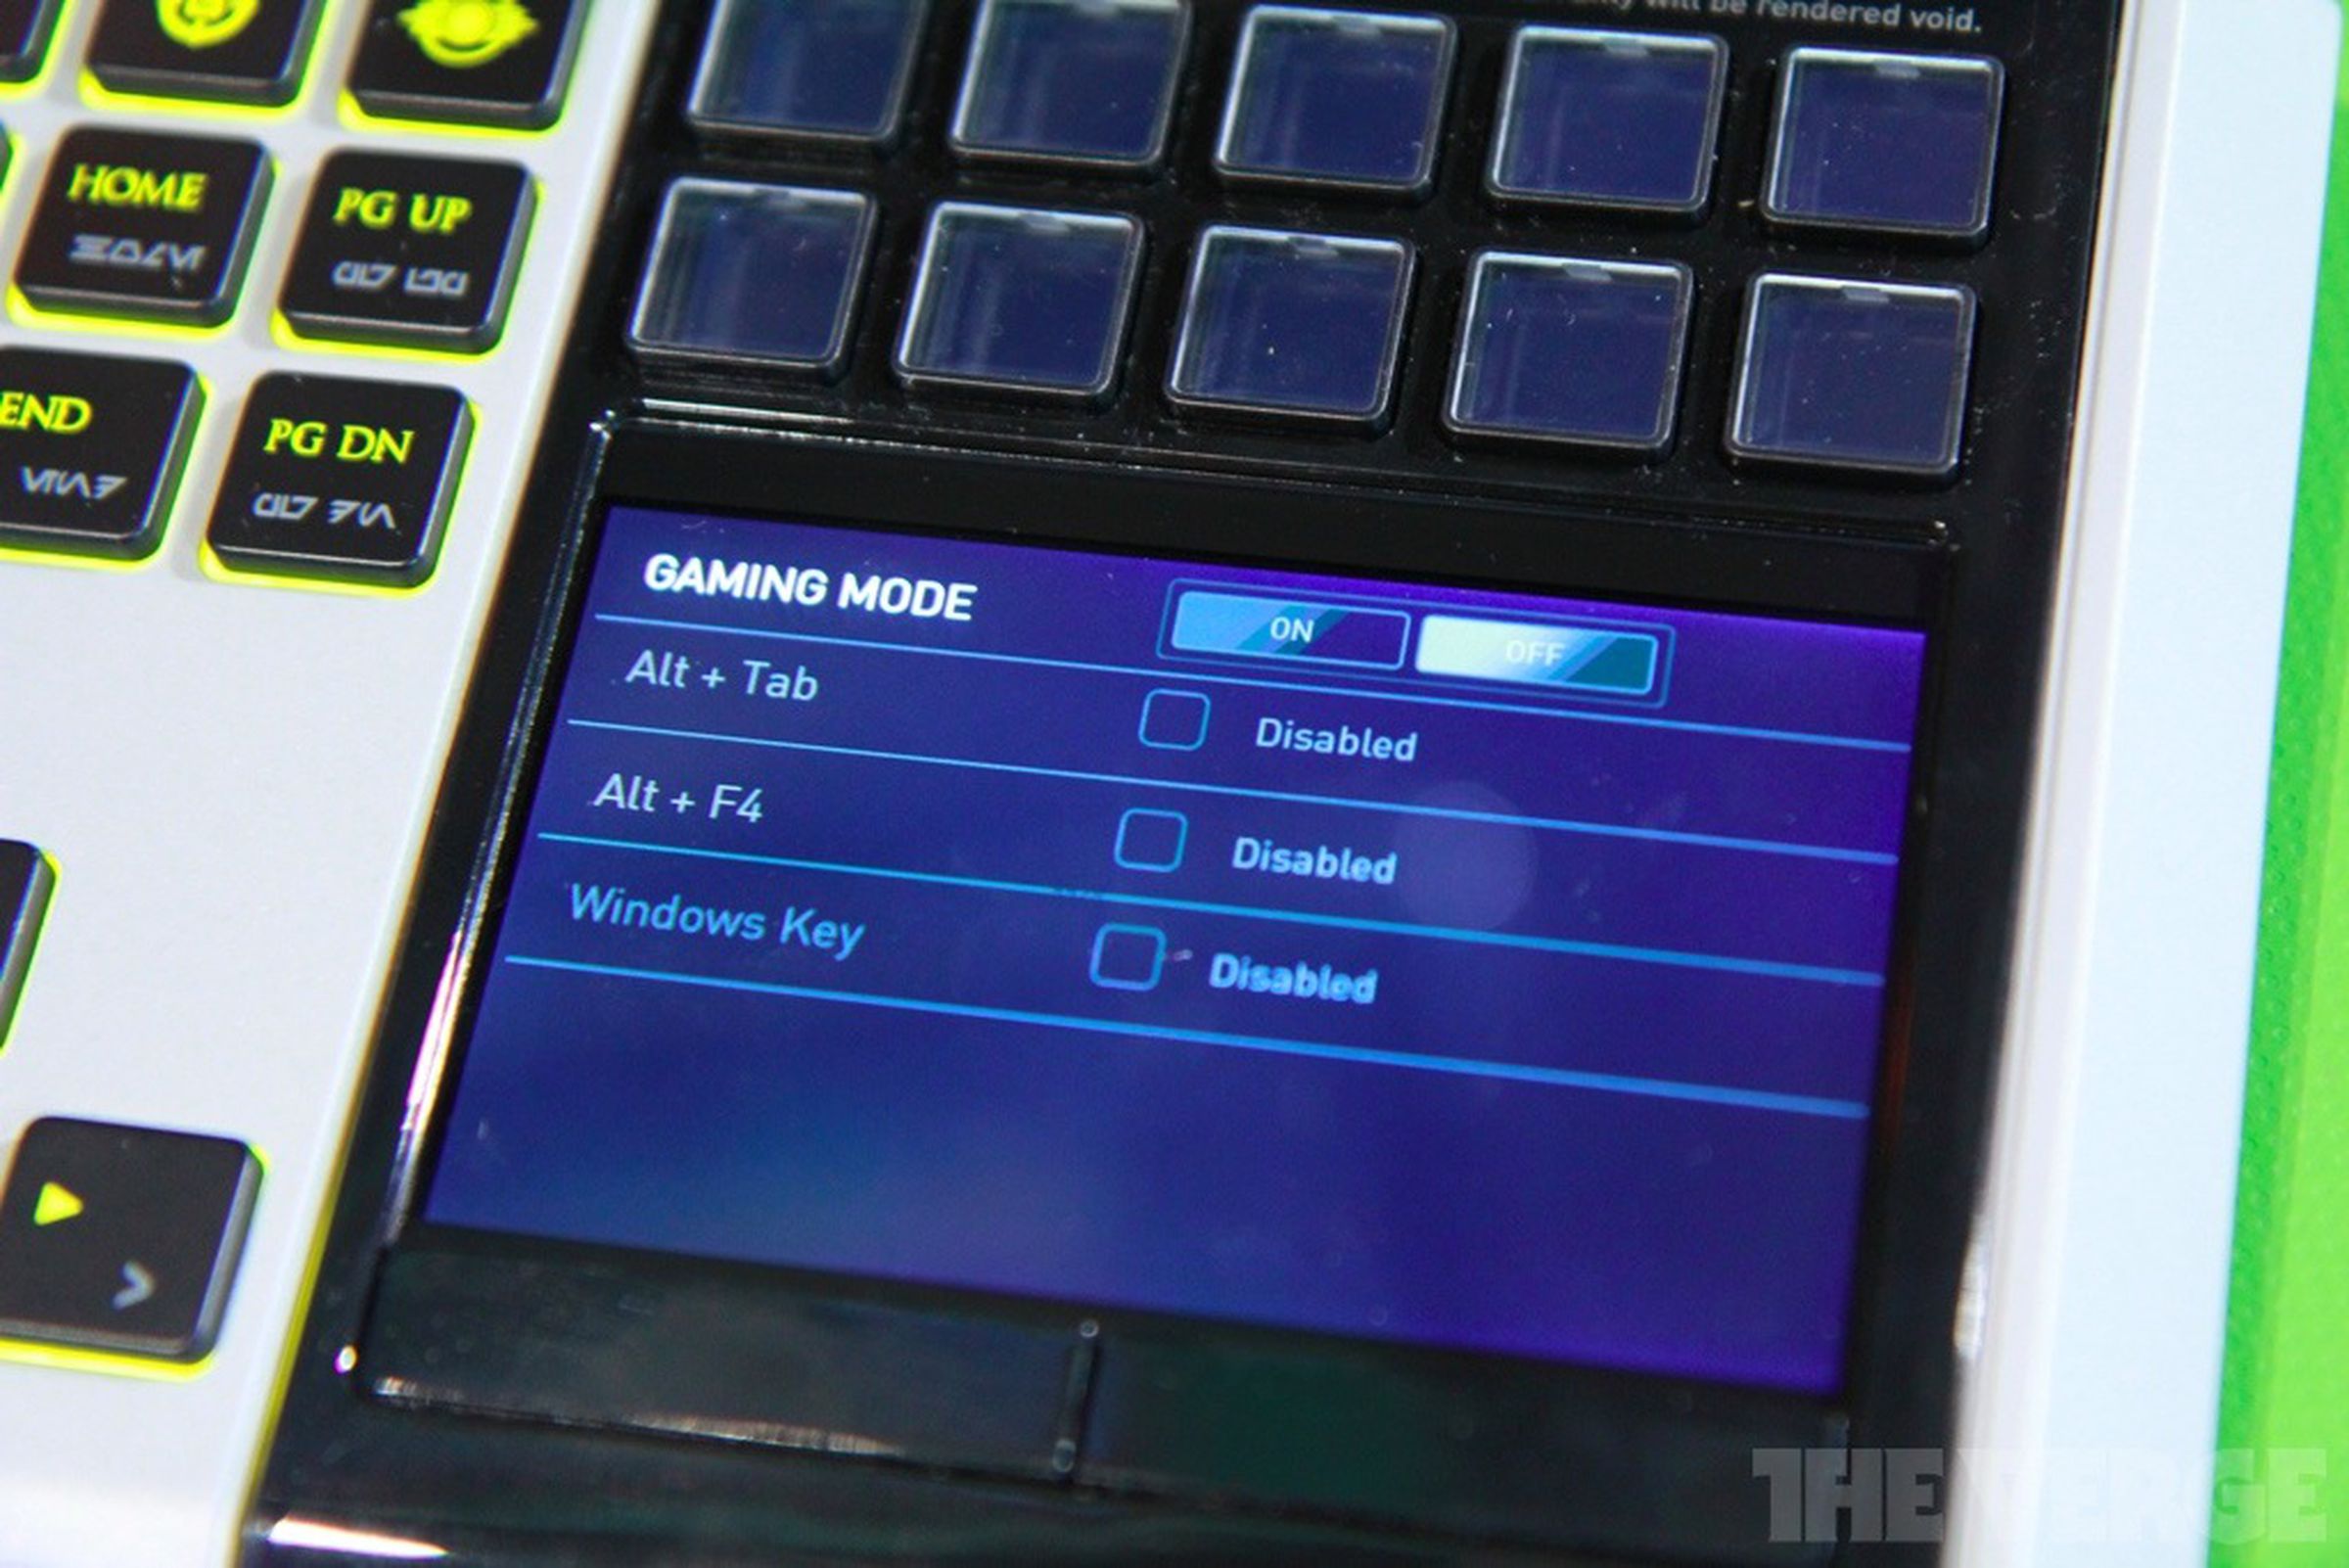 Razer's touchscreen "Star Wars: The Old Republic" keyboard hands-on pictures